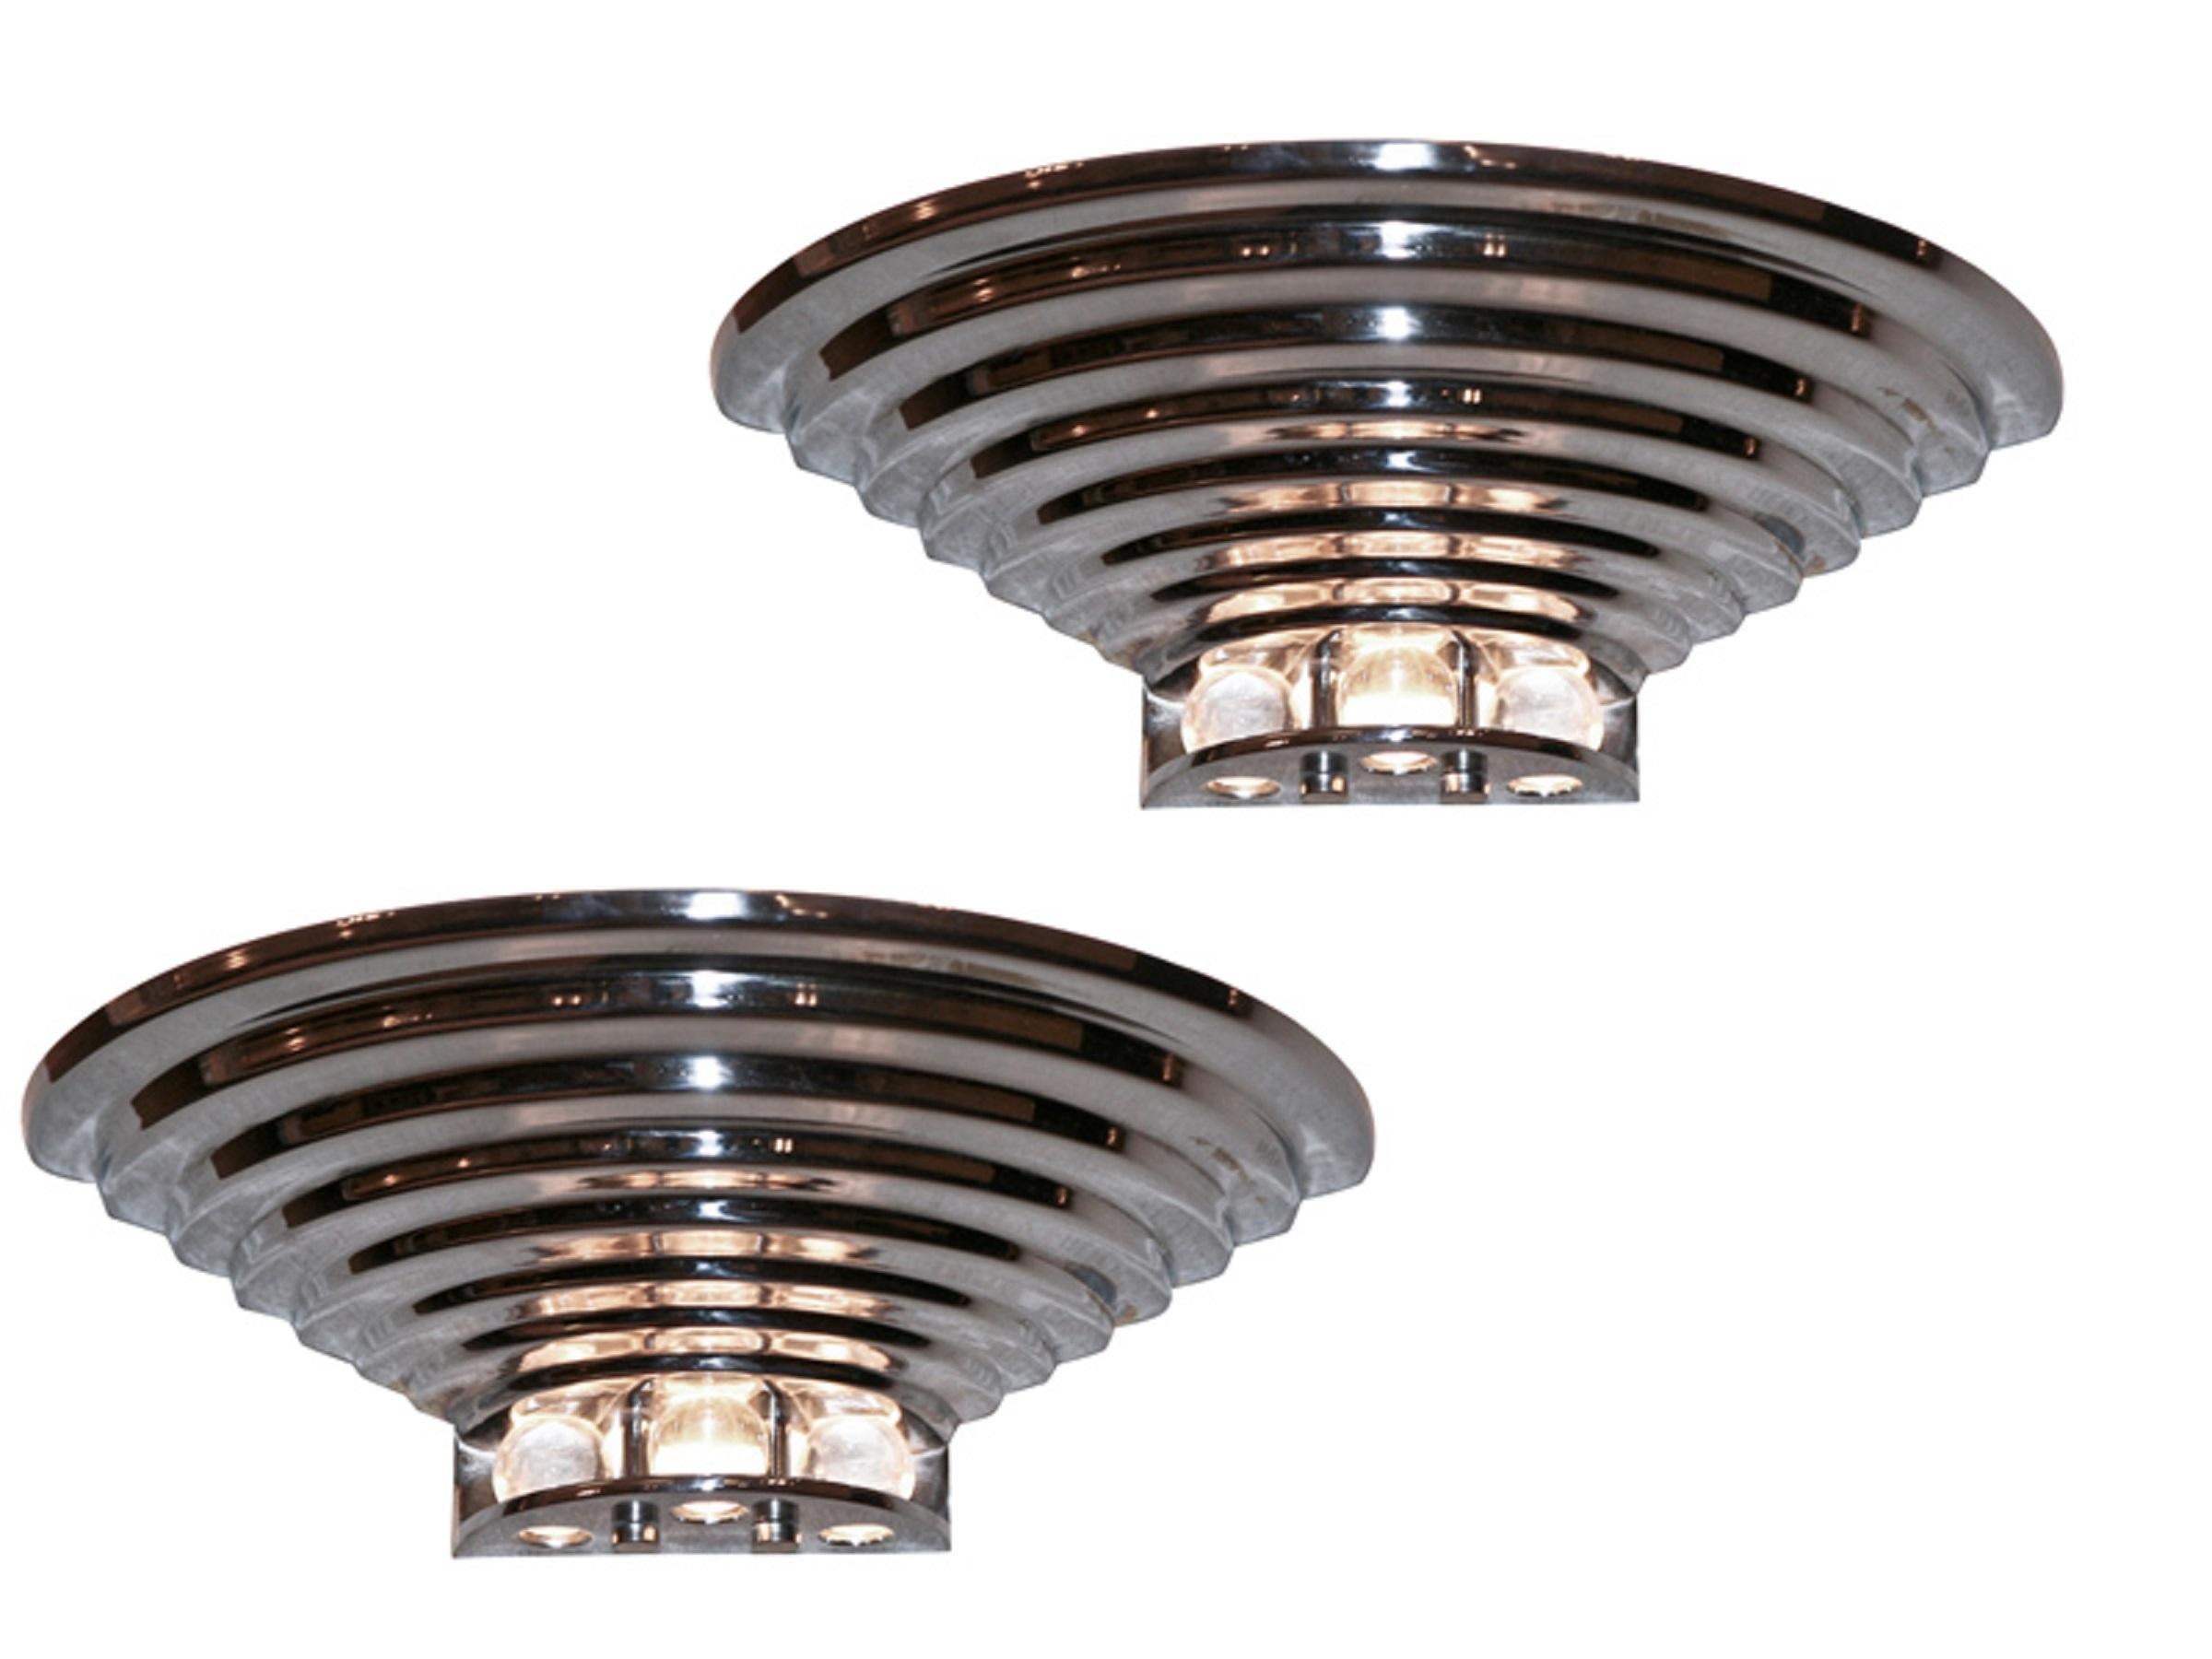 4 Sconces in Chrome and Glass, Style: Art Deco, 1930, Stamped Made in France For Sale 5